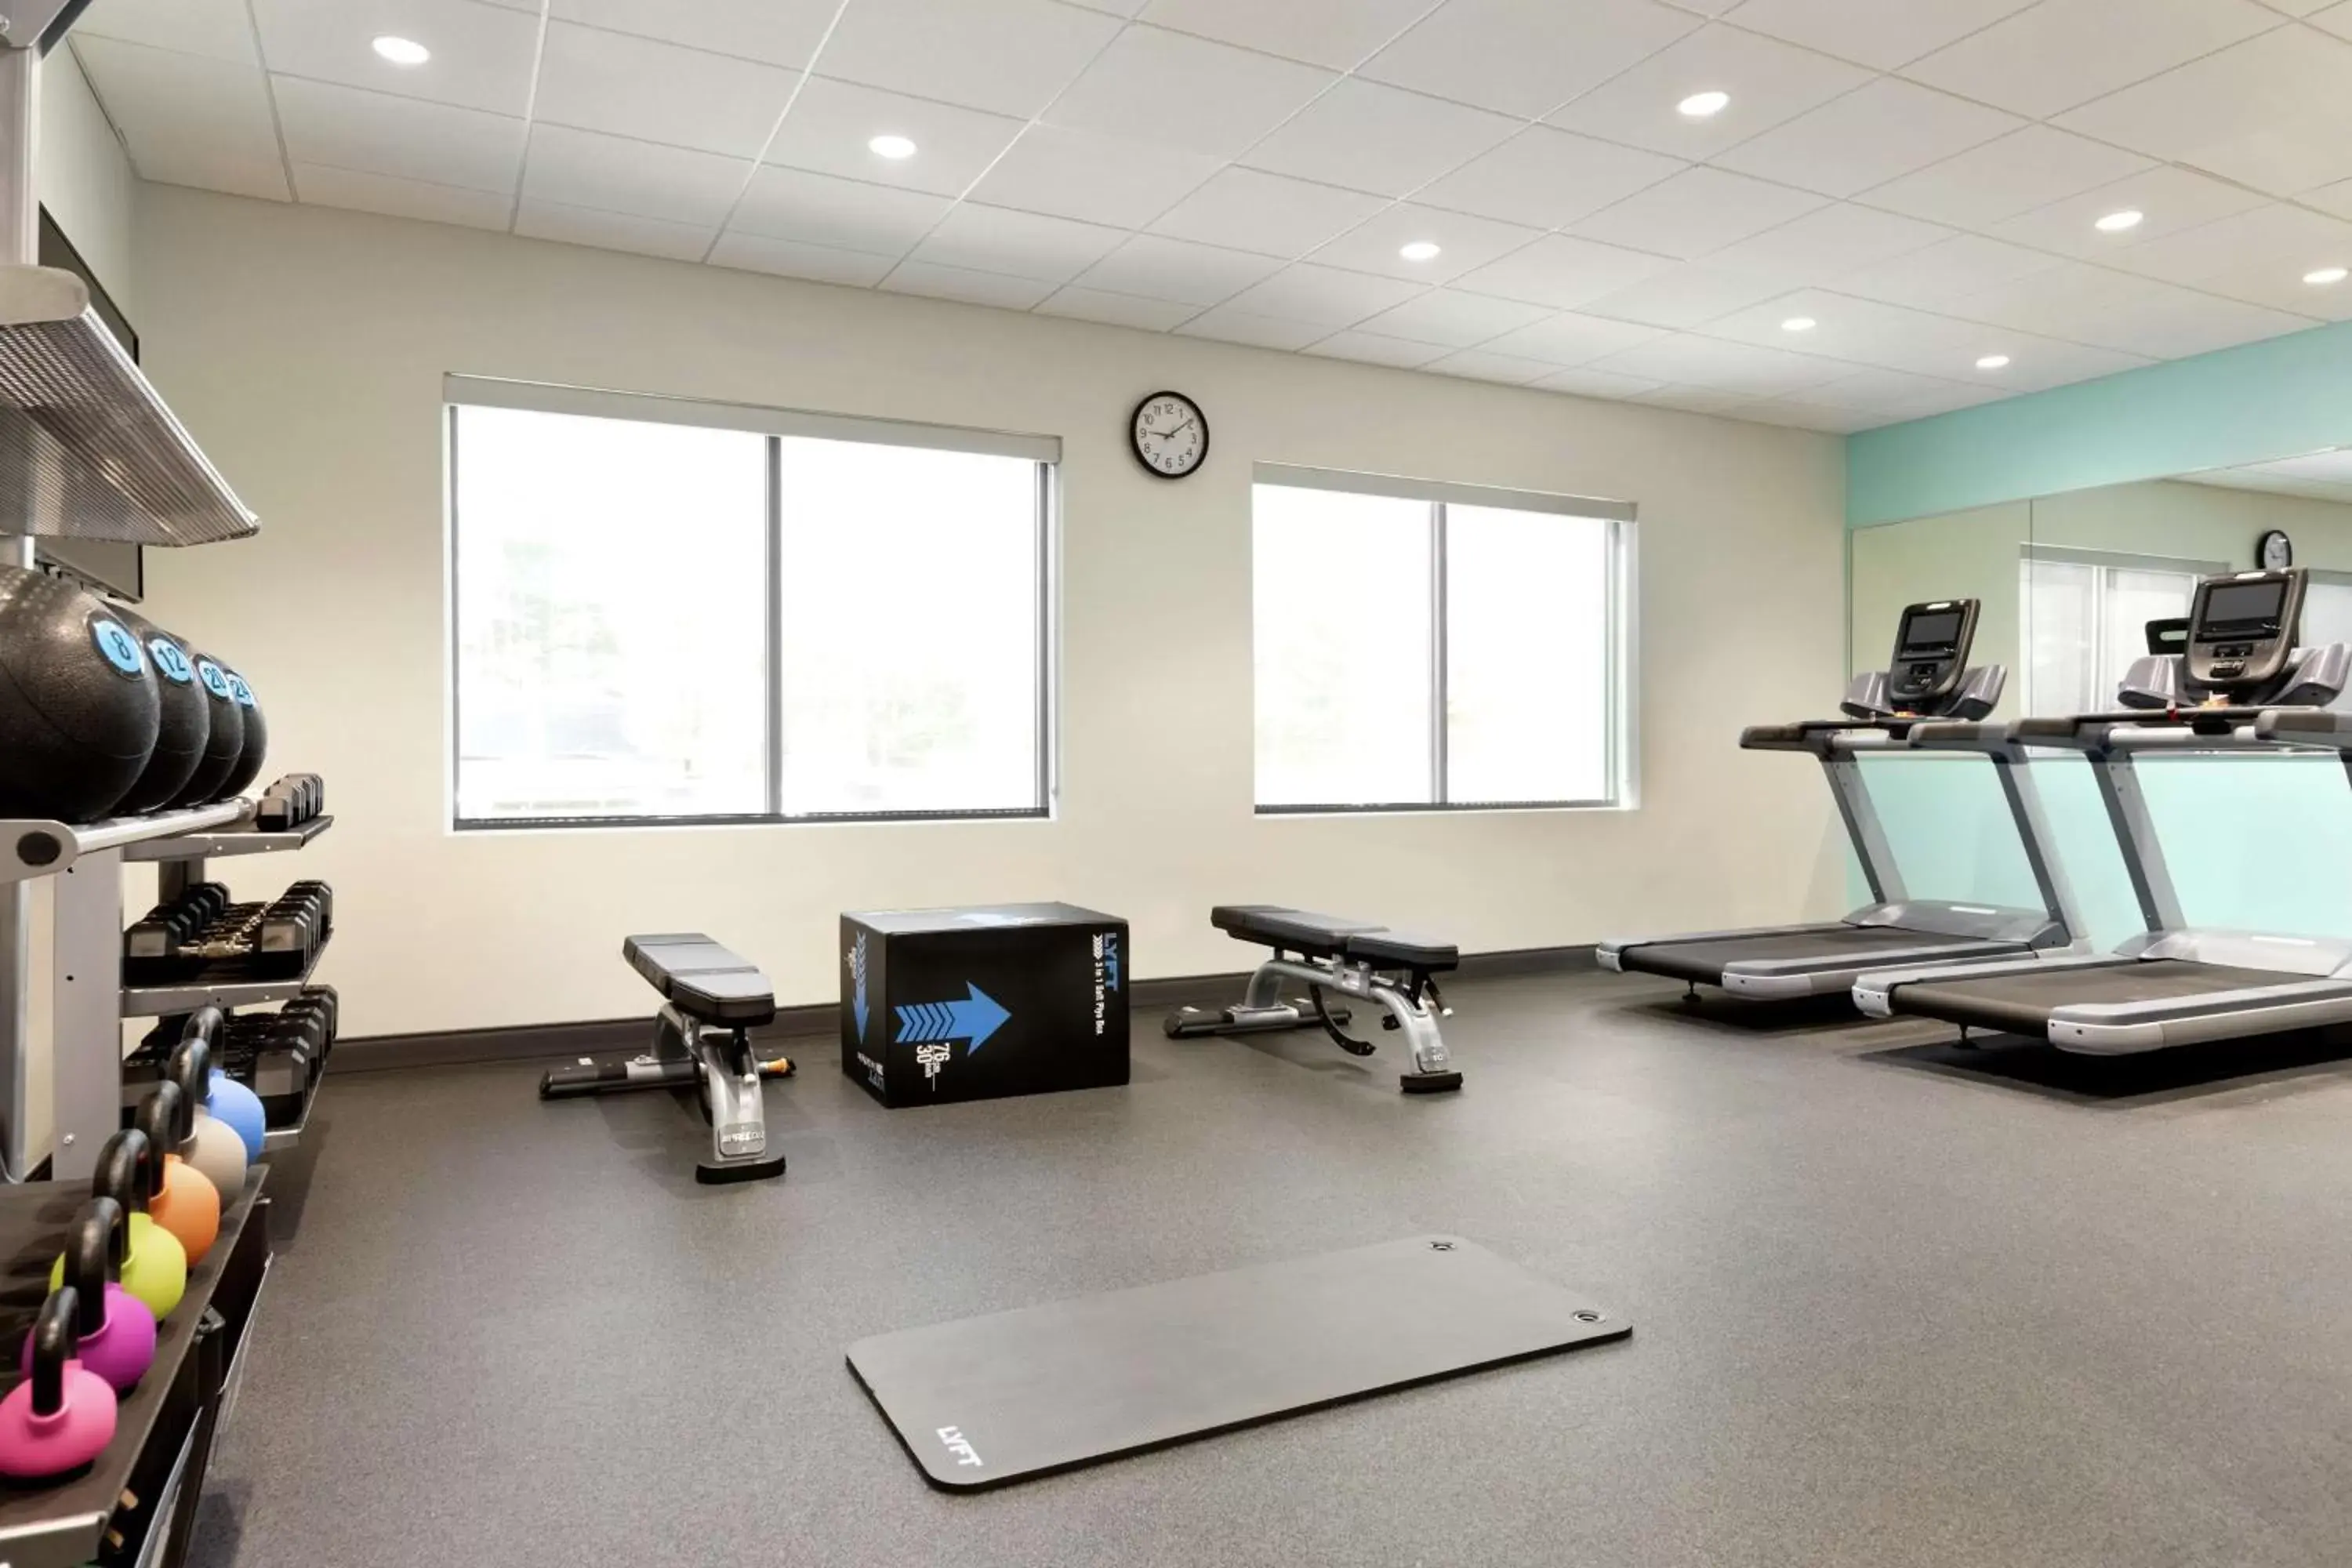 Fitness centre/facilities, Fitness Center/Facilities in Tru By Hilton Harbison Columbia